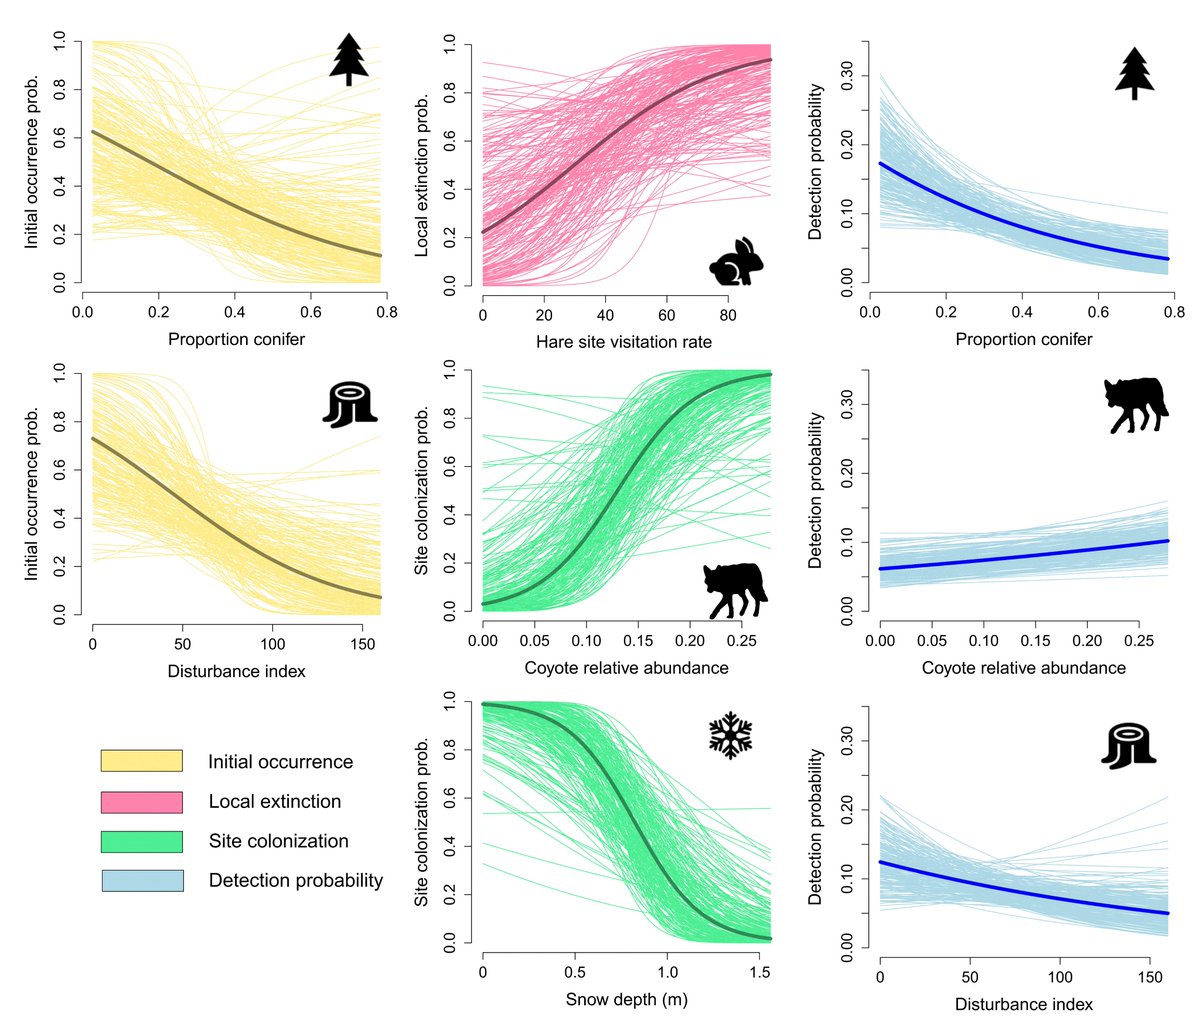 📢New OA Paper📢 Happy to share our new paper on how top-down and bottom-up factors influence red fox occurrence and persistence in winter. Wonderful to work with @BrynEvansTweets, @AlessioMortell2, and @remington_moll on this study esajournals.onlinelibrary.wiley.com/doi/10.1002/ec…